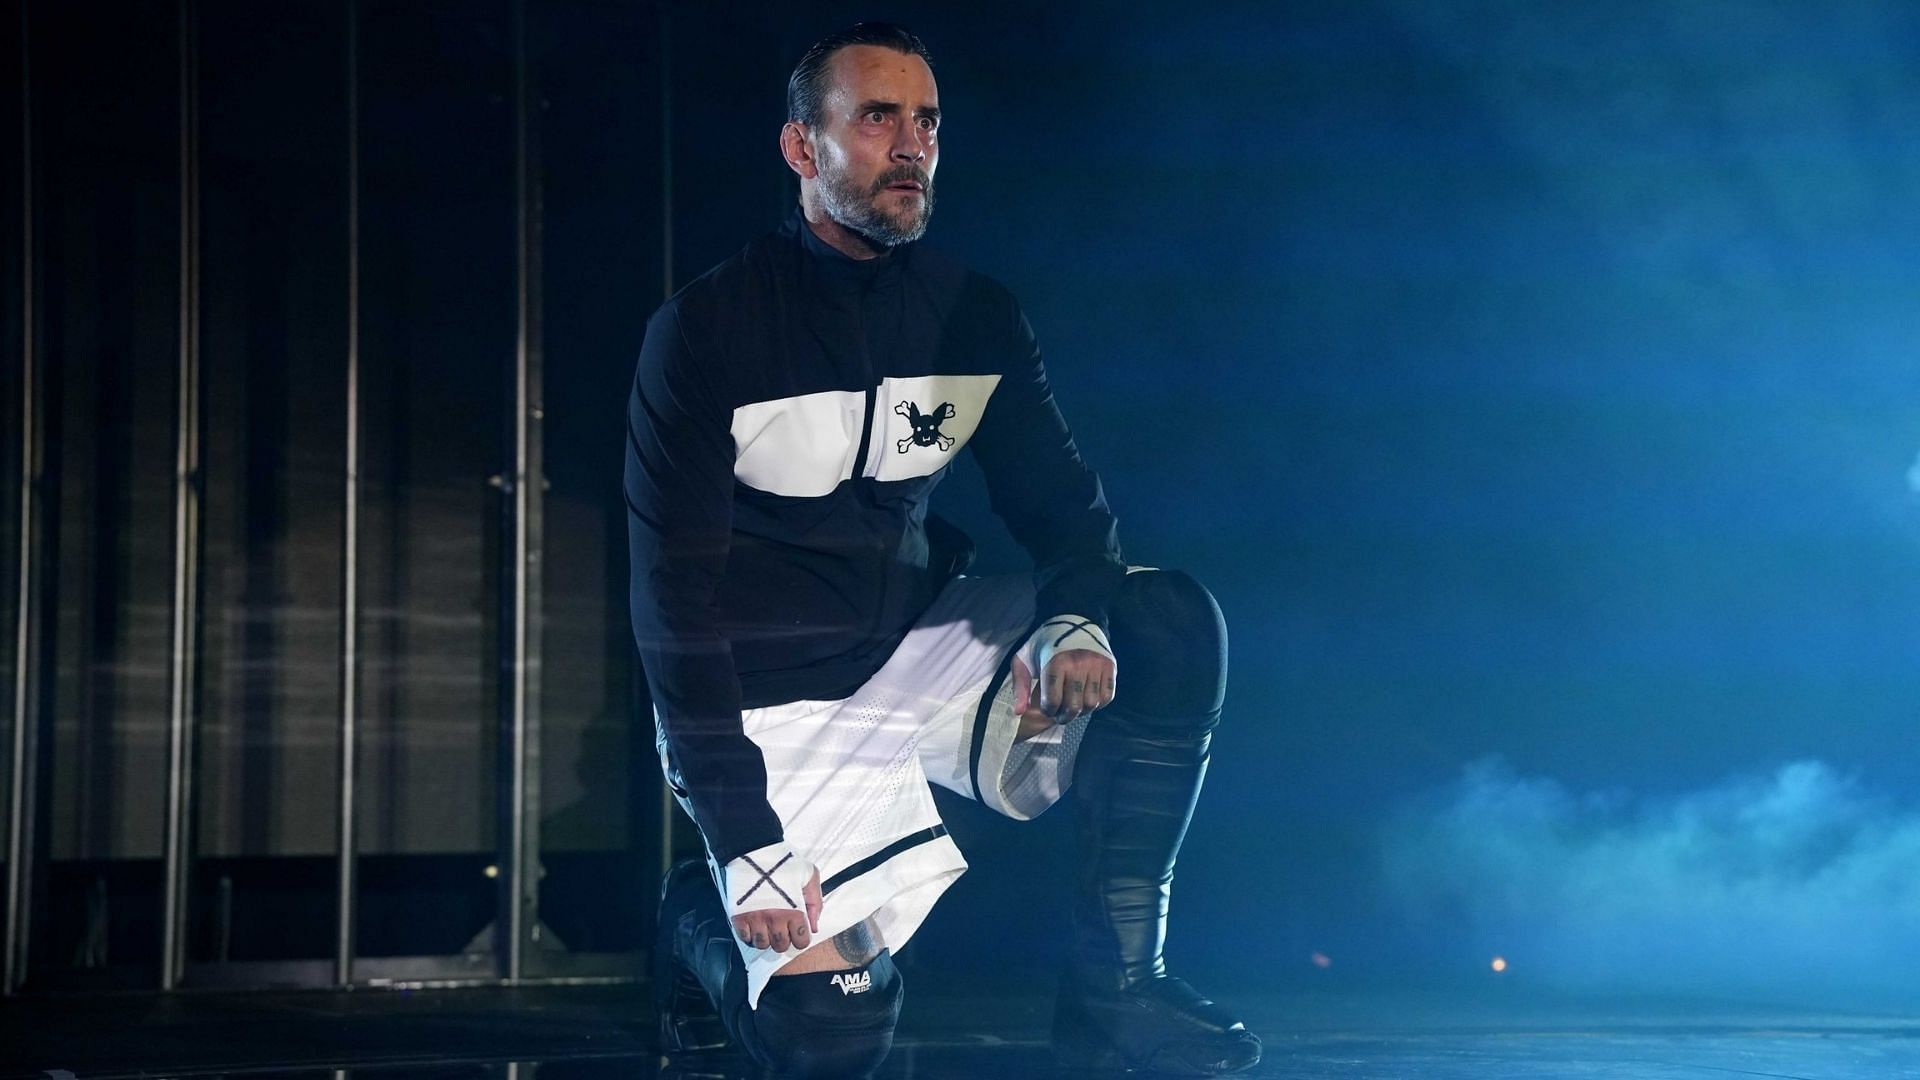 CM Punk turned back the clock during his Revolution entrance